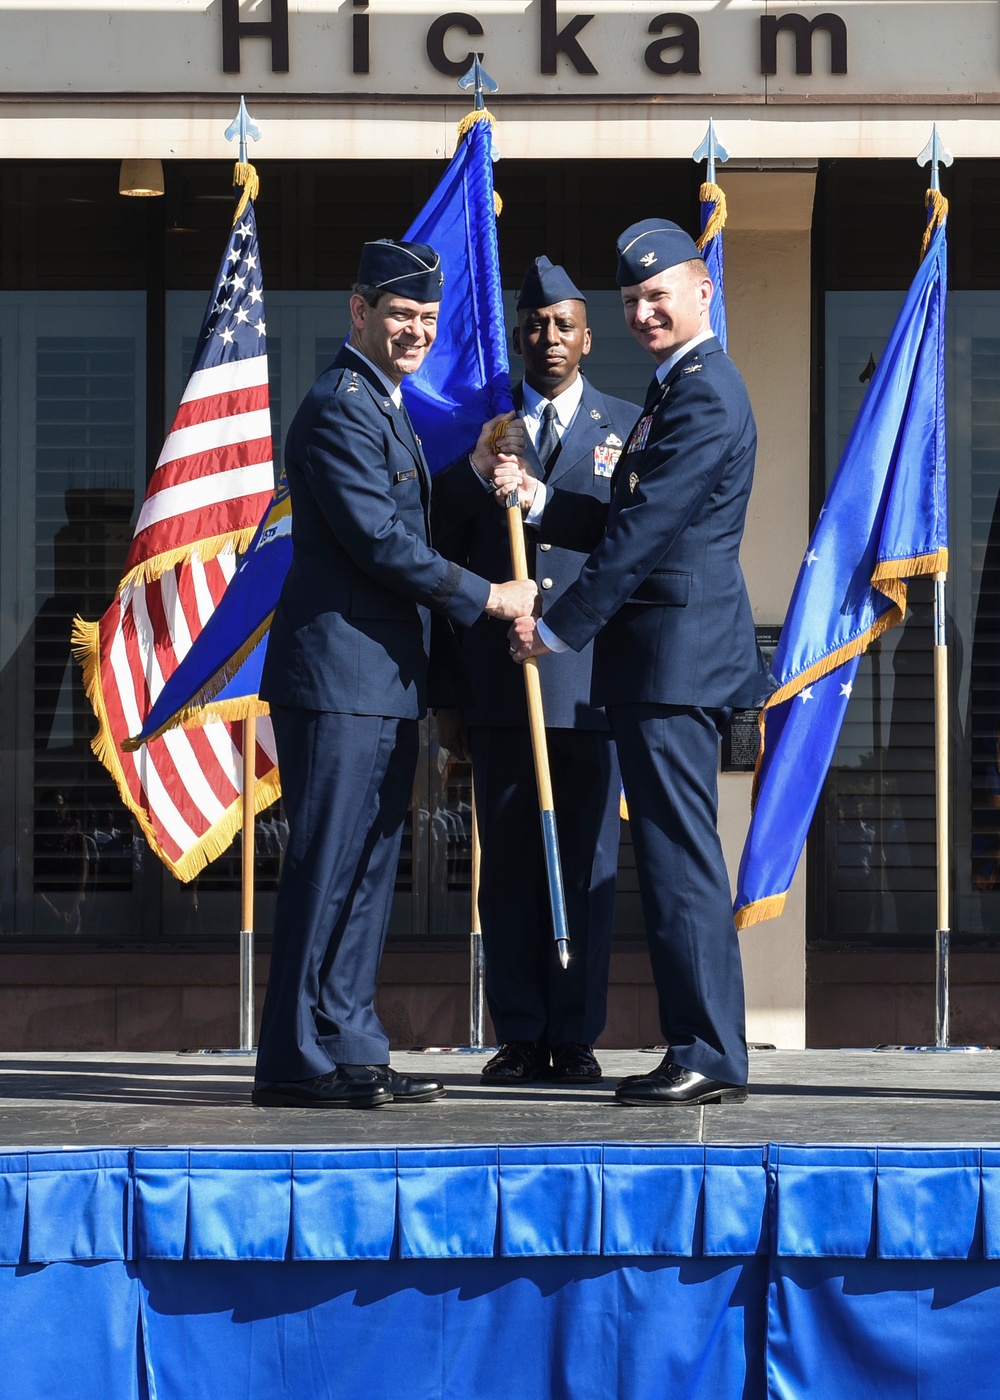 Hickam Welcomes New Wing Commander